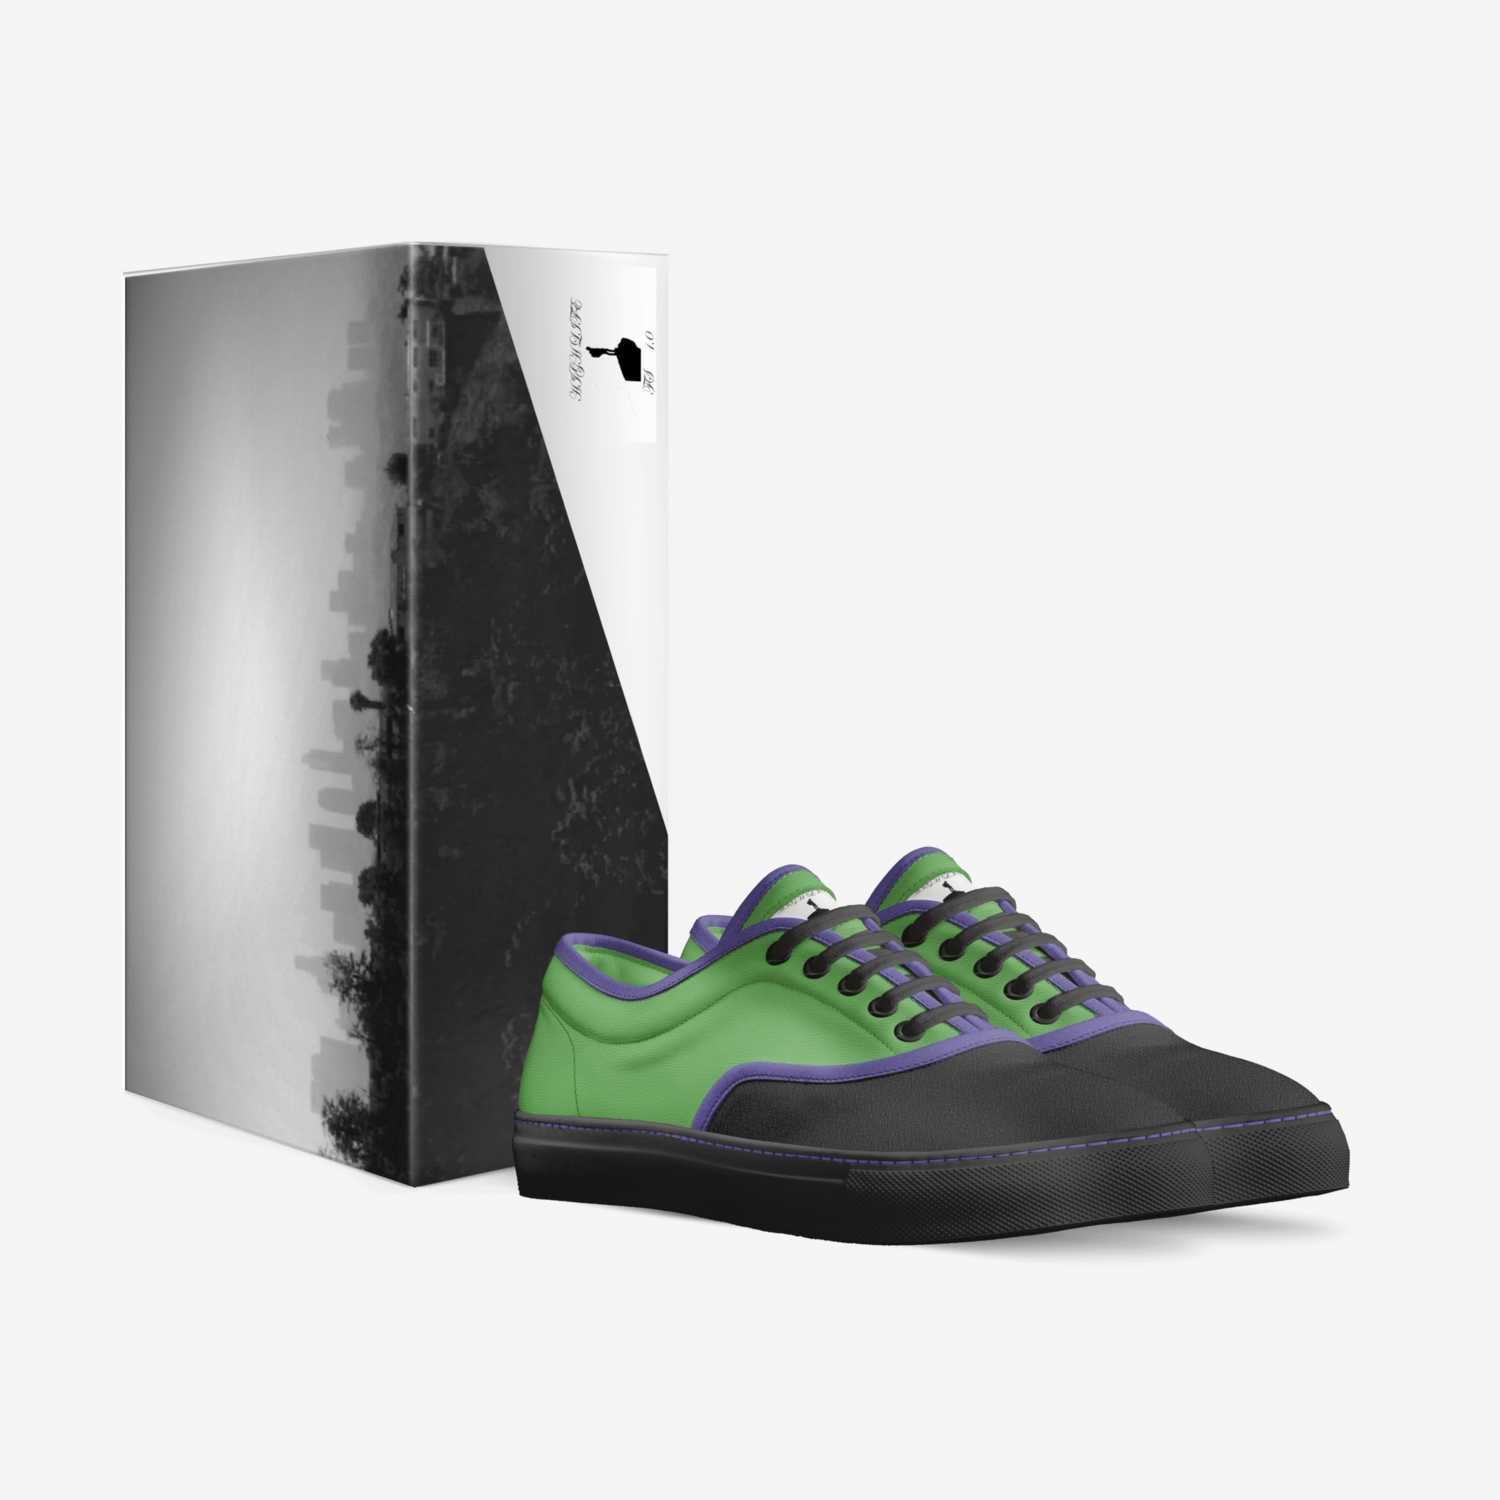 High Life FS 1.0 custom made in Italy shoes by Frederick Shaw | Box view